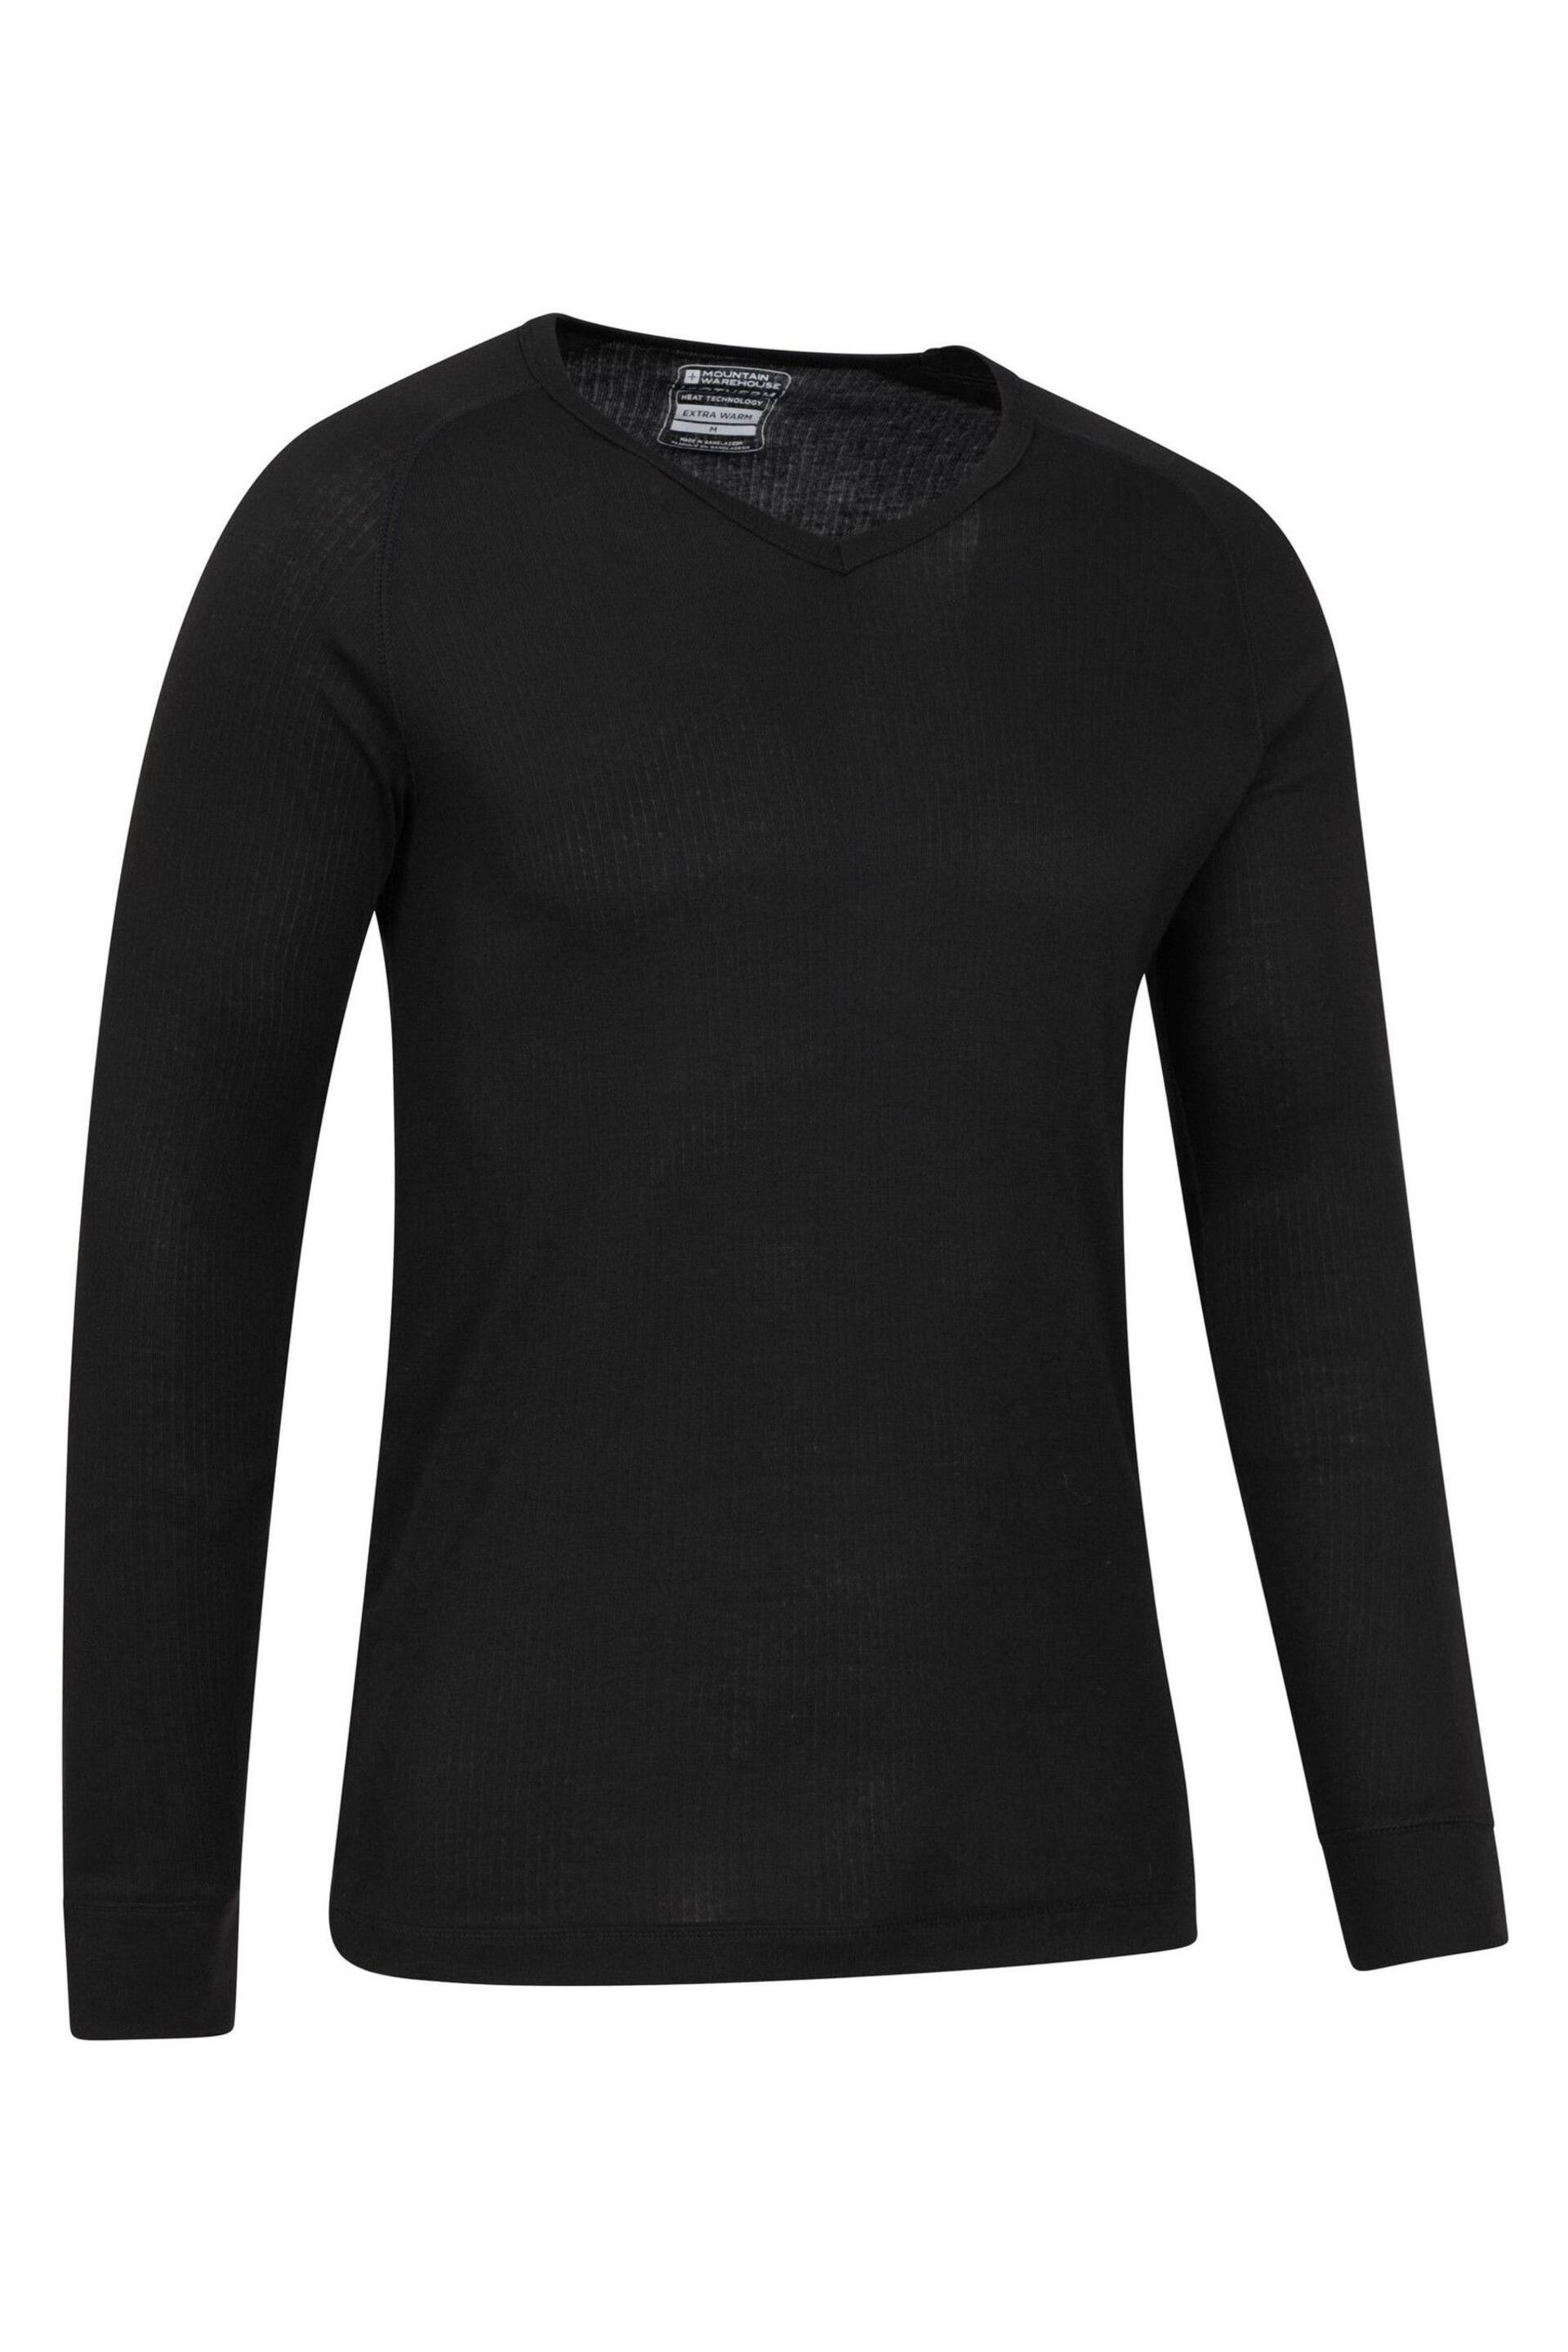 Mountain Warehouse Black Talus Mens Thermal Top - Image 5 of 5